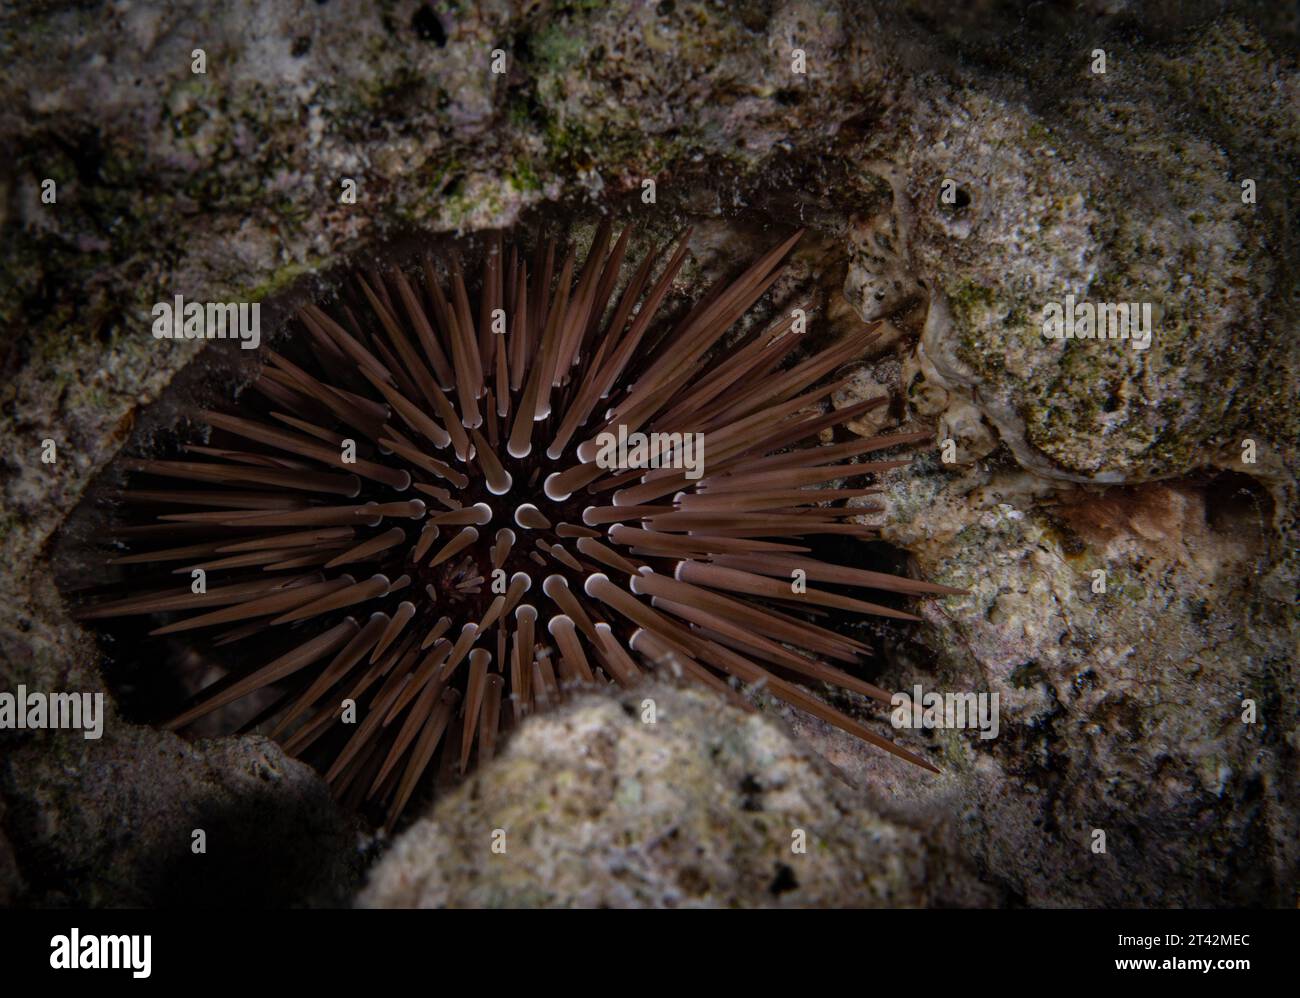 A burrowing urchin (Echinometra mathaei) on a rocky seabed in its natural habitat Stock Photo